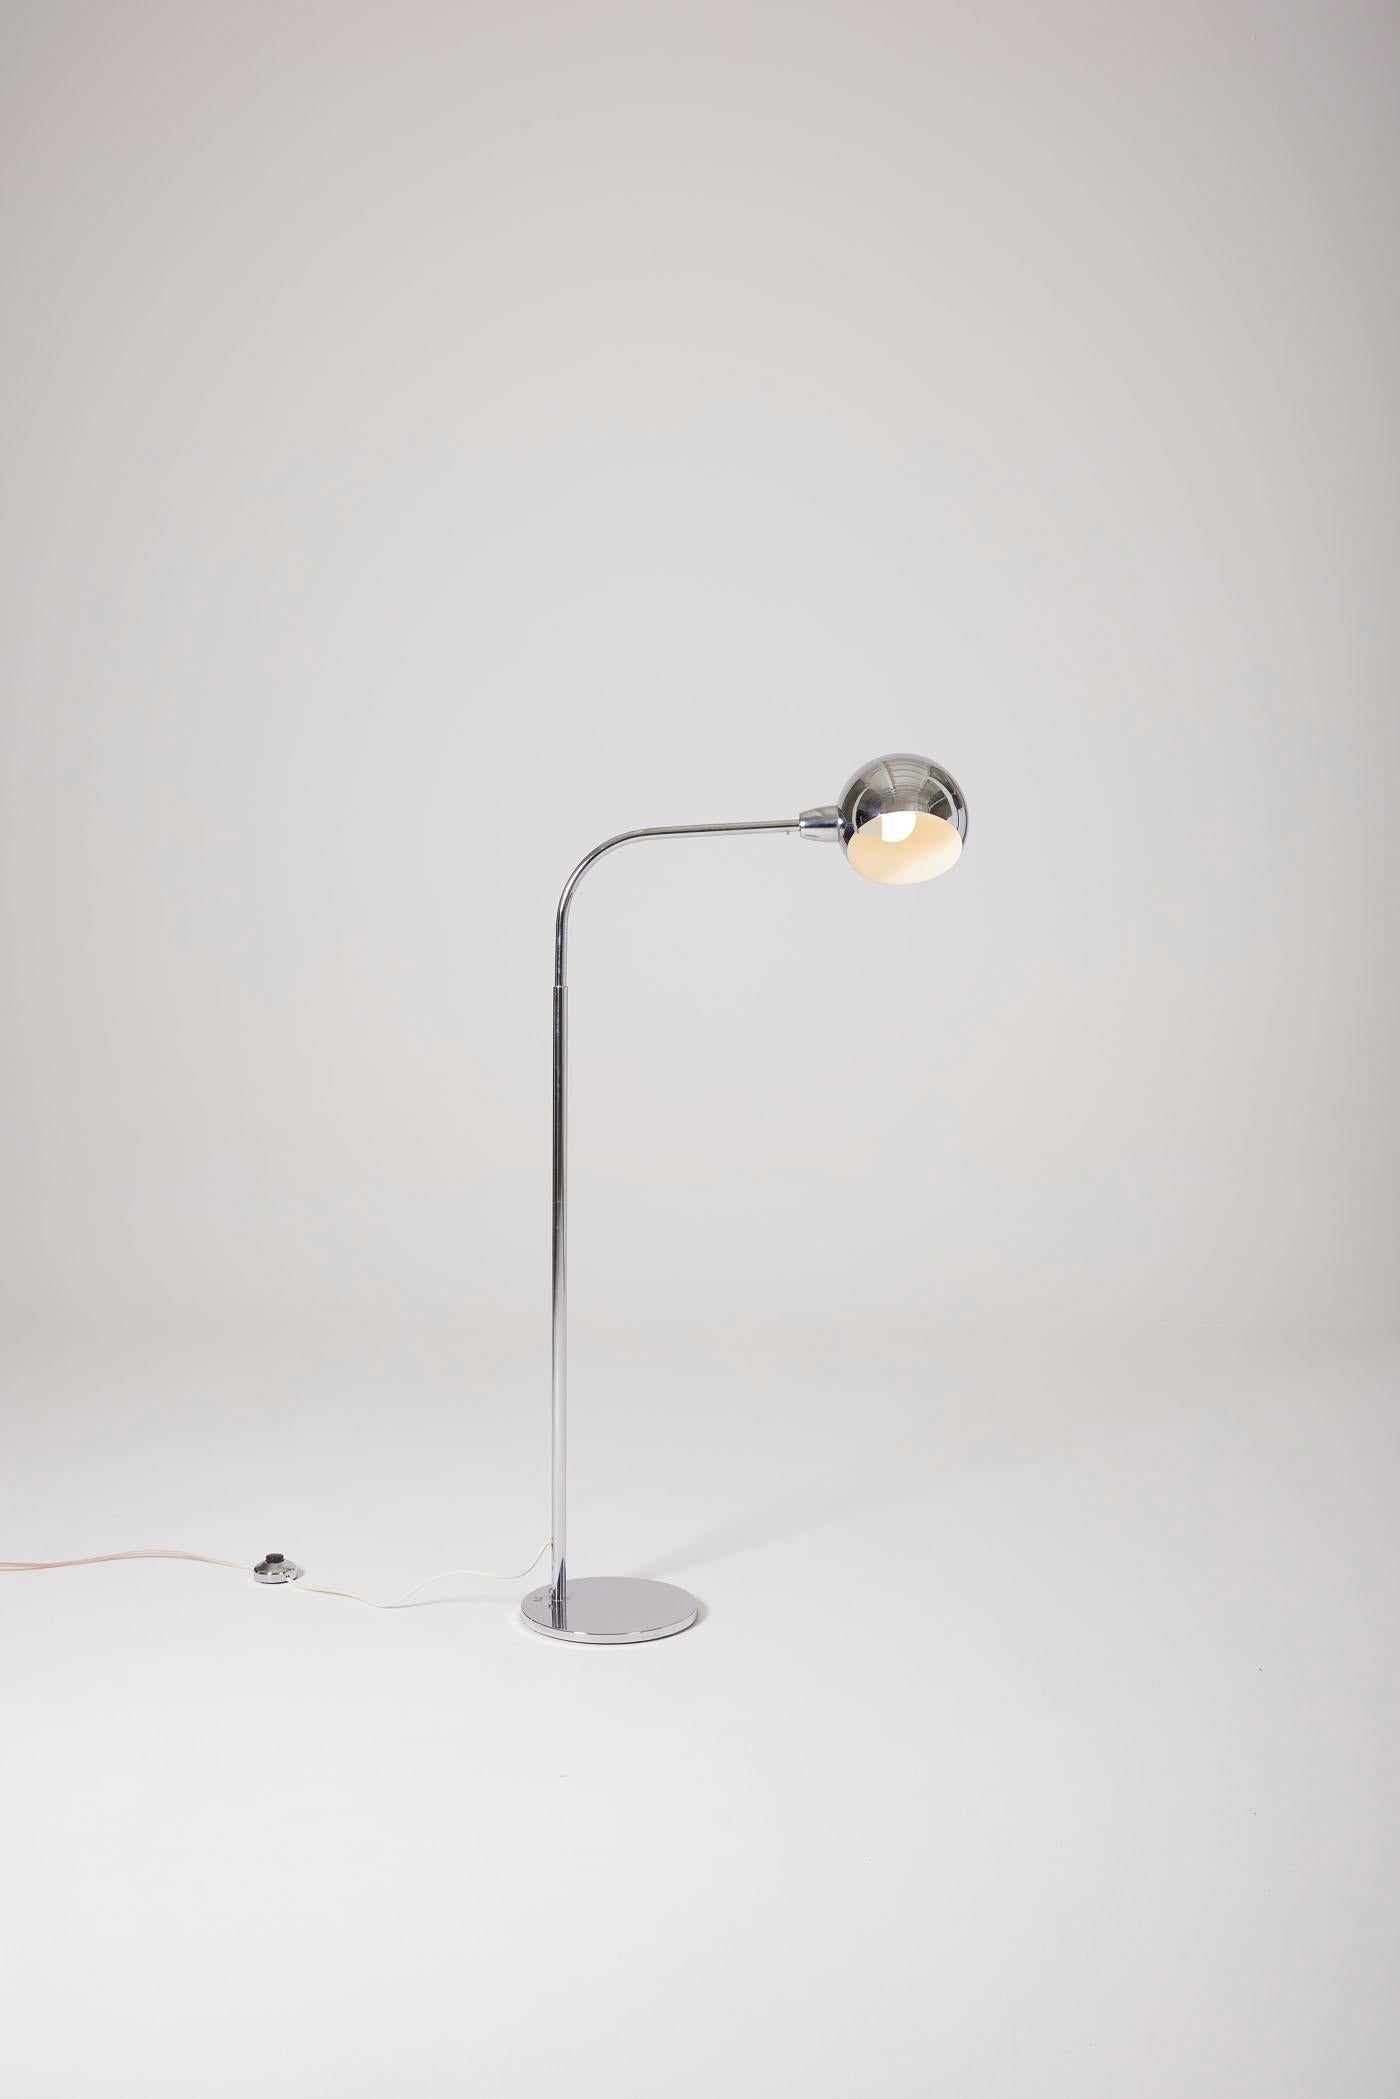 Chrome-plated metal floor lamp, Vinticinque Terra model, designed by Italian designer Sergio Asti and produced by Candle in the 1960s. The reflector rests on an adjustable base. In very good condition.
DV279